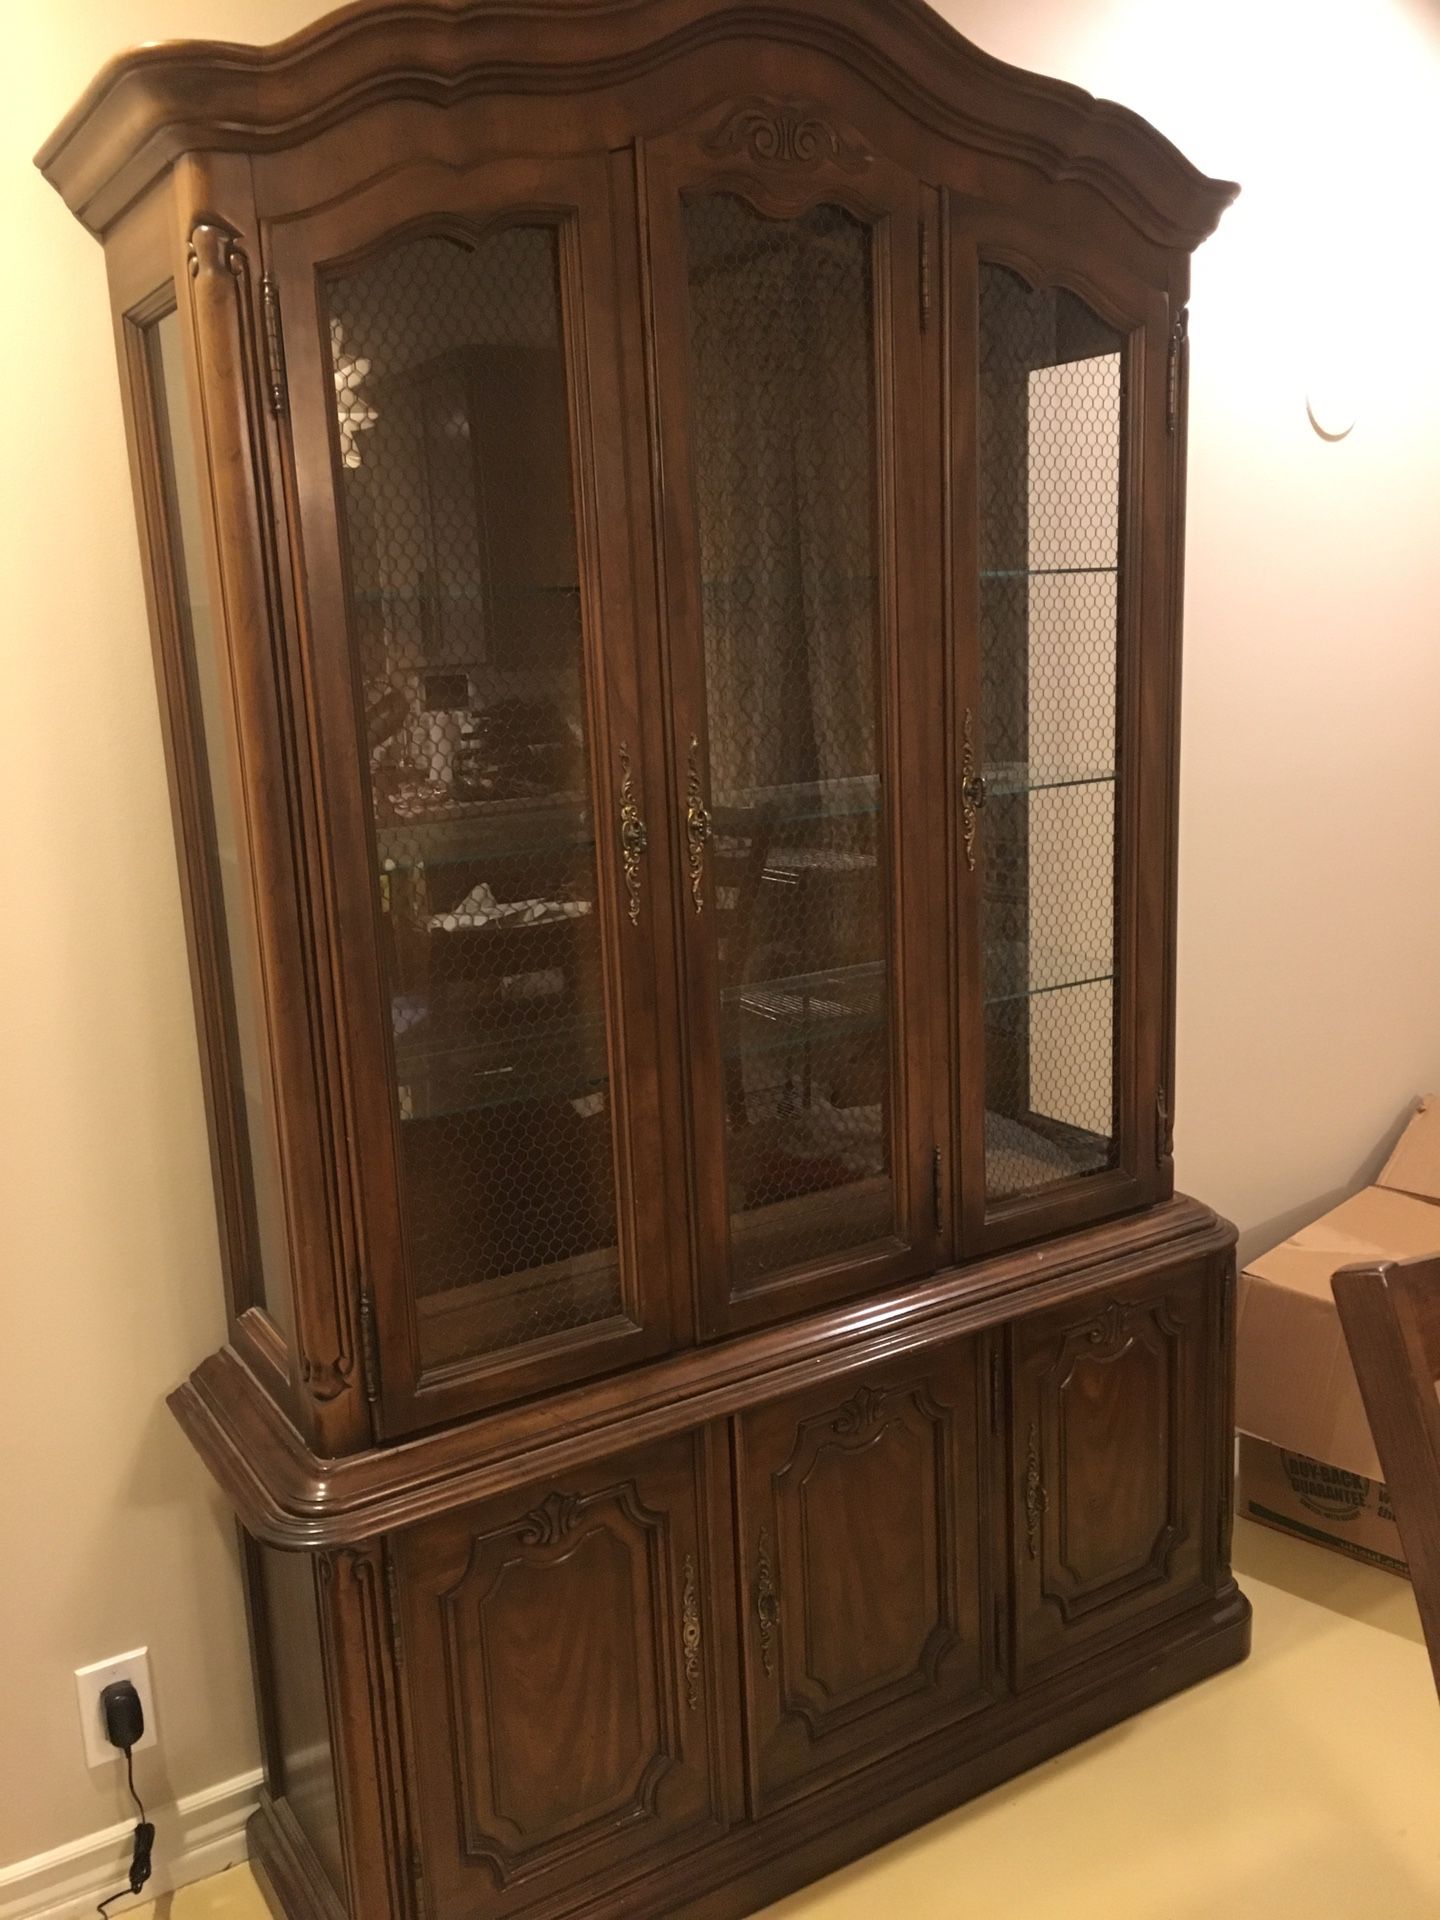 Antique Oak China Cabinet - Real Wood - Mint Condition